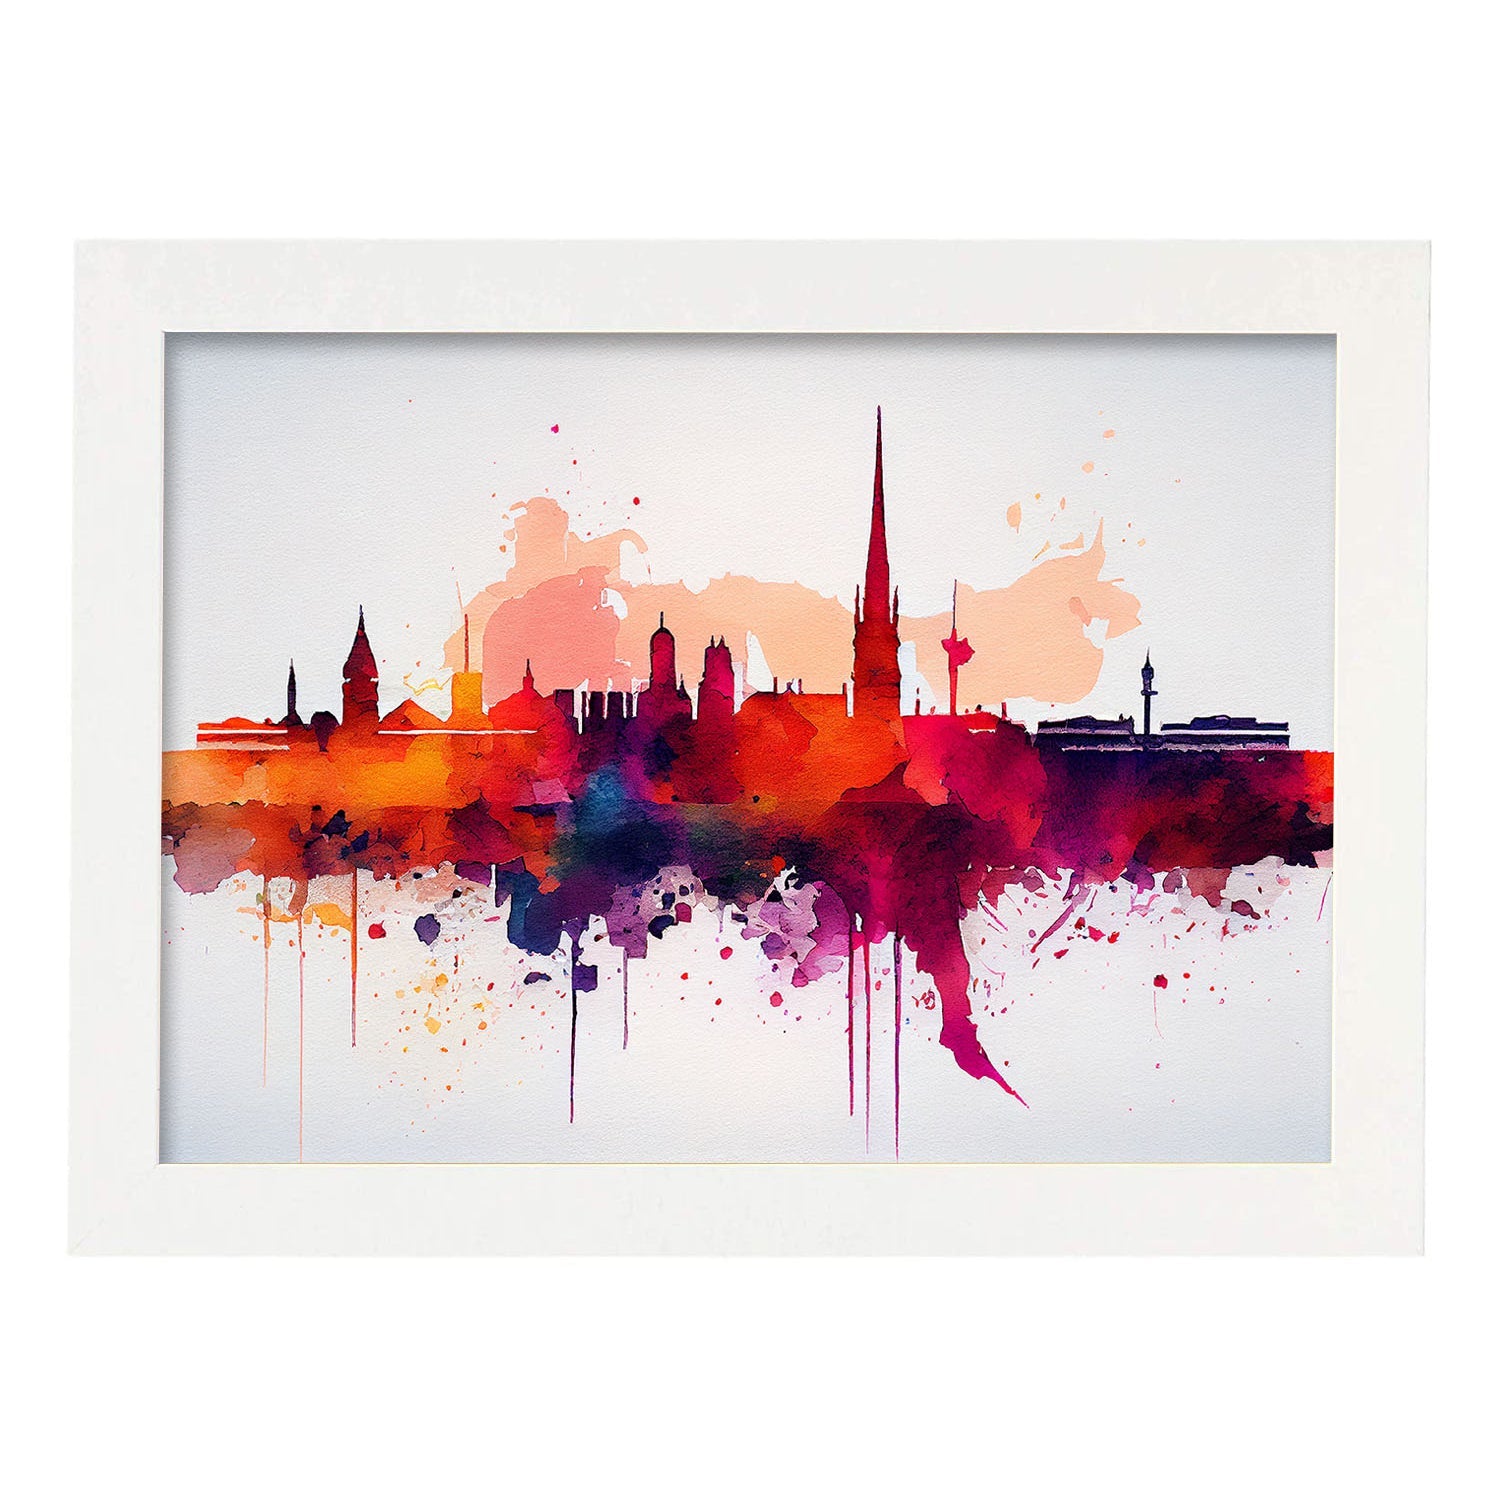 Nacnic watercolor of a skyline of the city of Bordeaux_2. Aesthetic Wall Art Prints for Bedroom or Living Room Design.-Artwork-Nacnic-A4-Marco Blanco-Nacnic Estudio SL